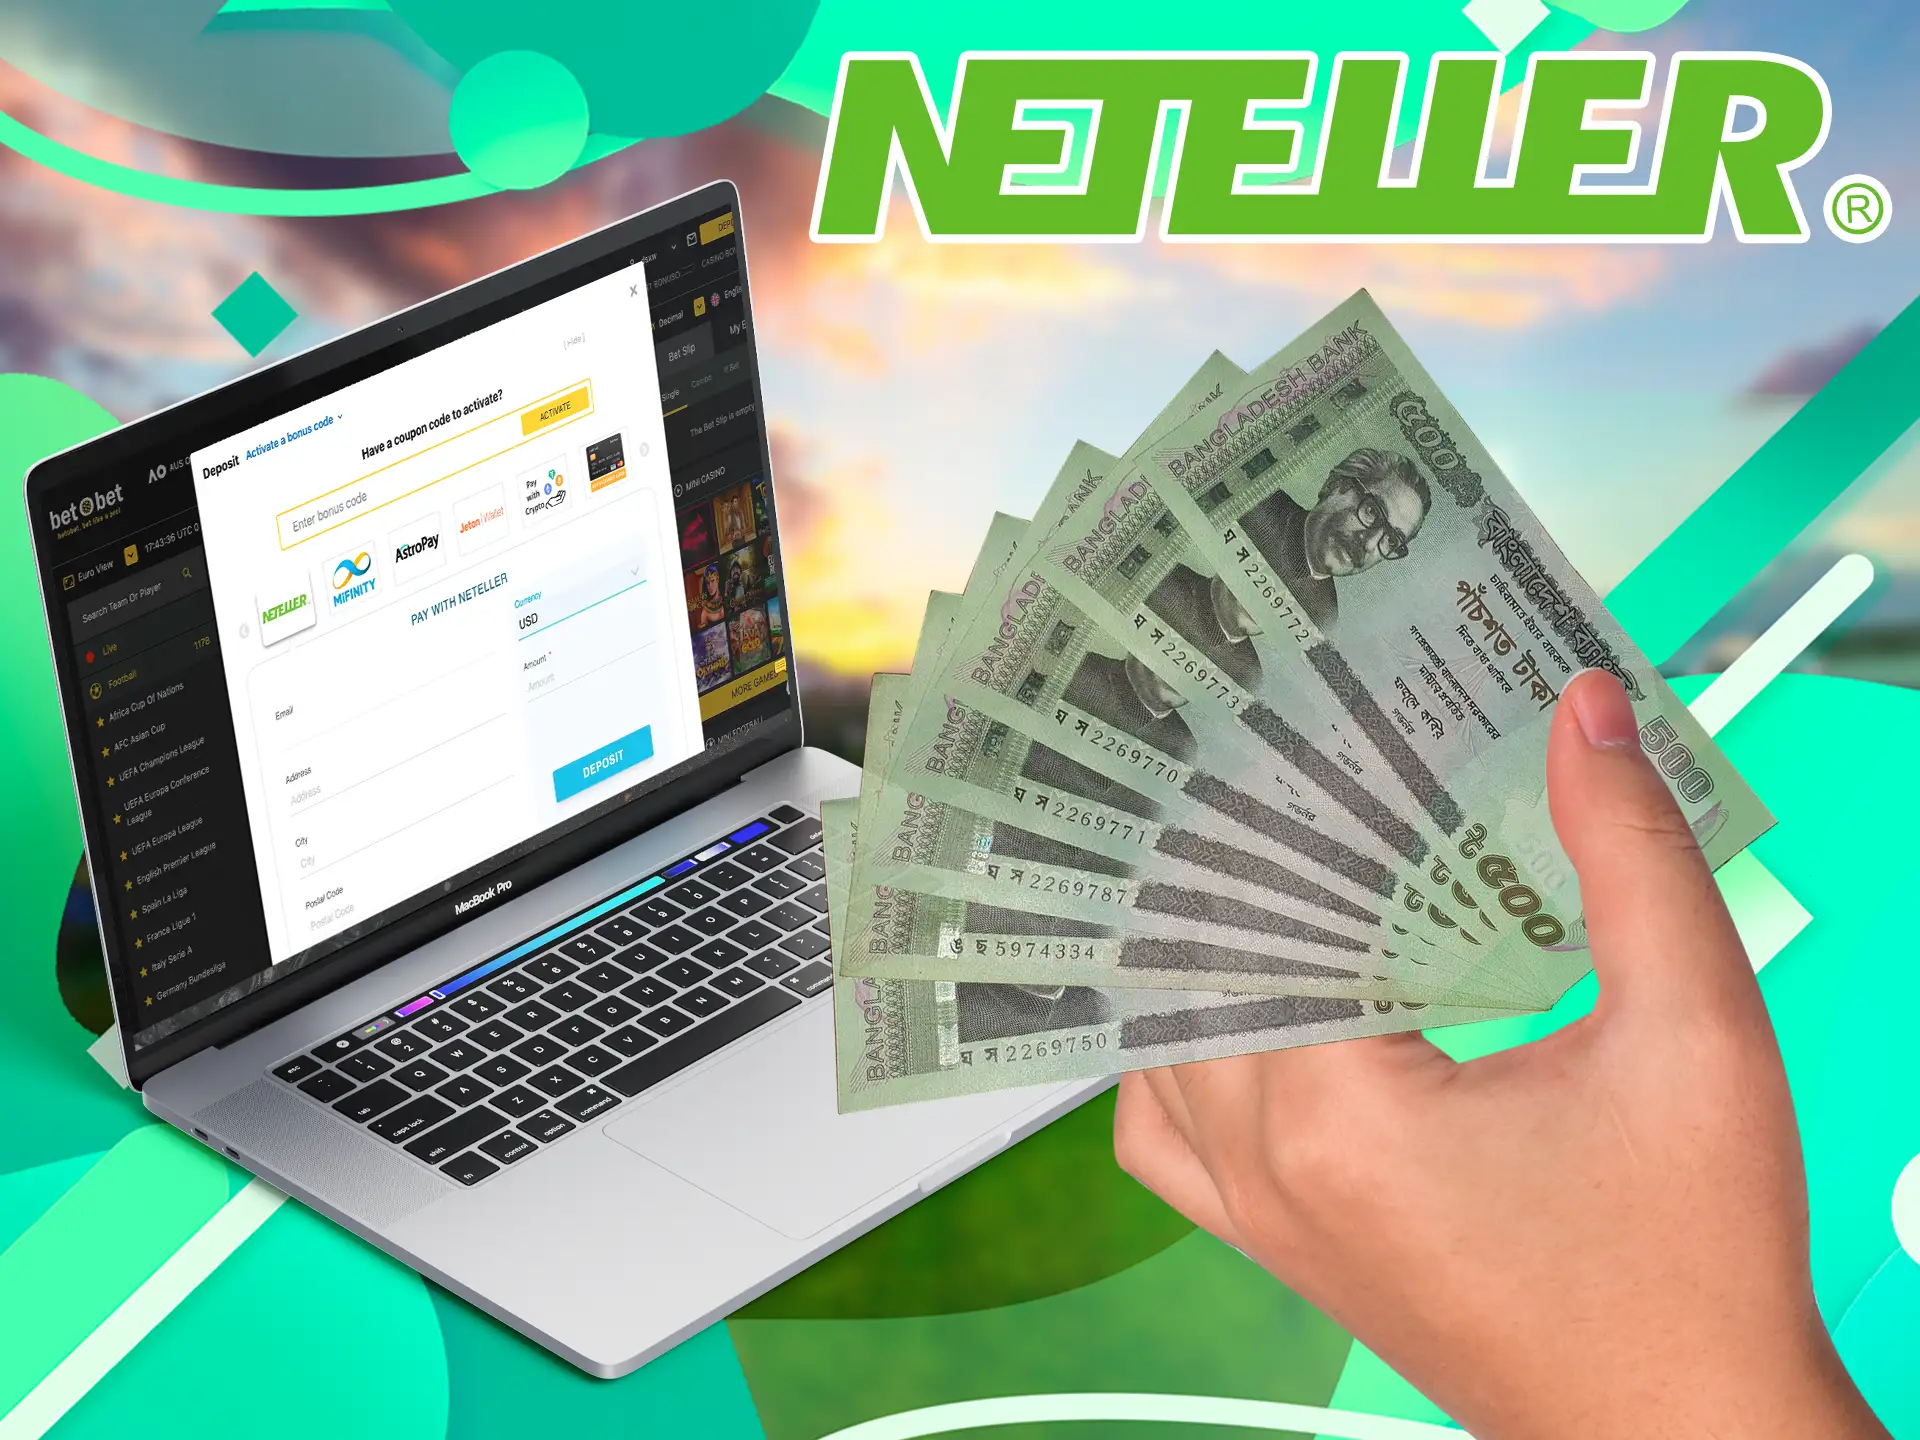 Our simple guide will help players from Bangladesh to fund their accounts with Neteller and start betting.